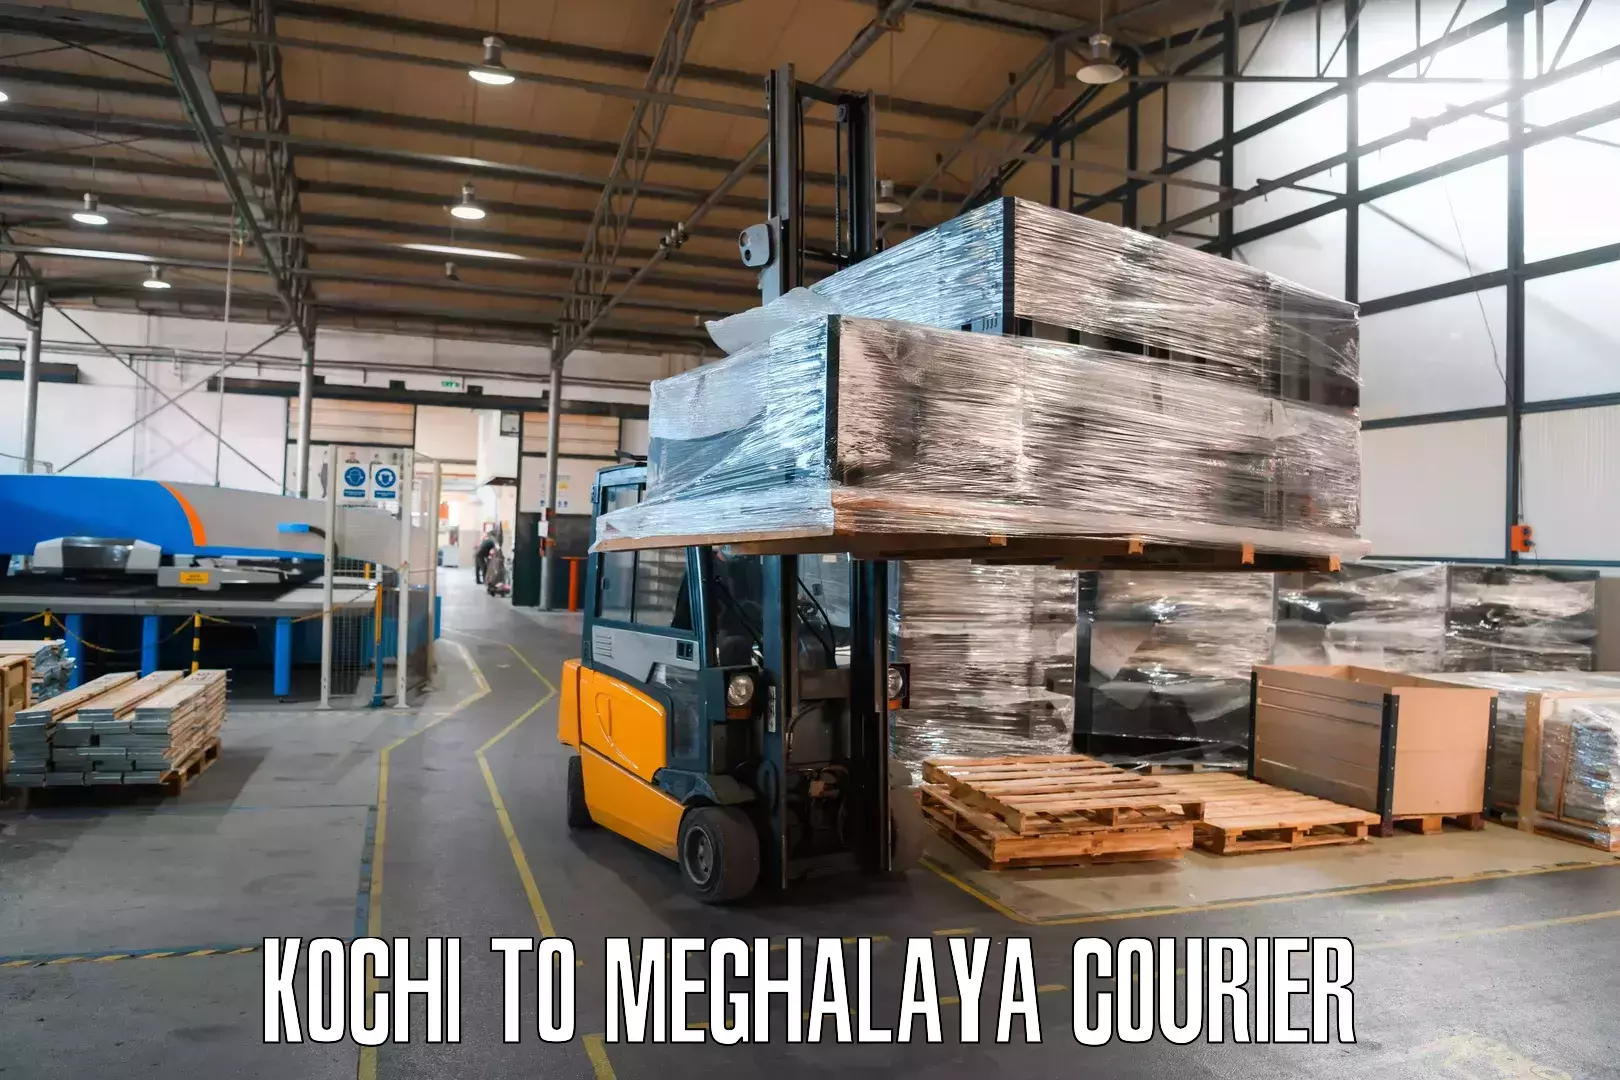 State-of-the-art courier technology Kochi to Meghalaya